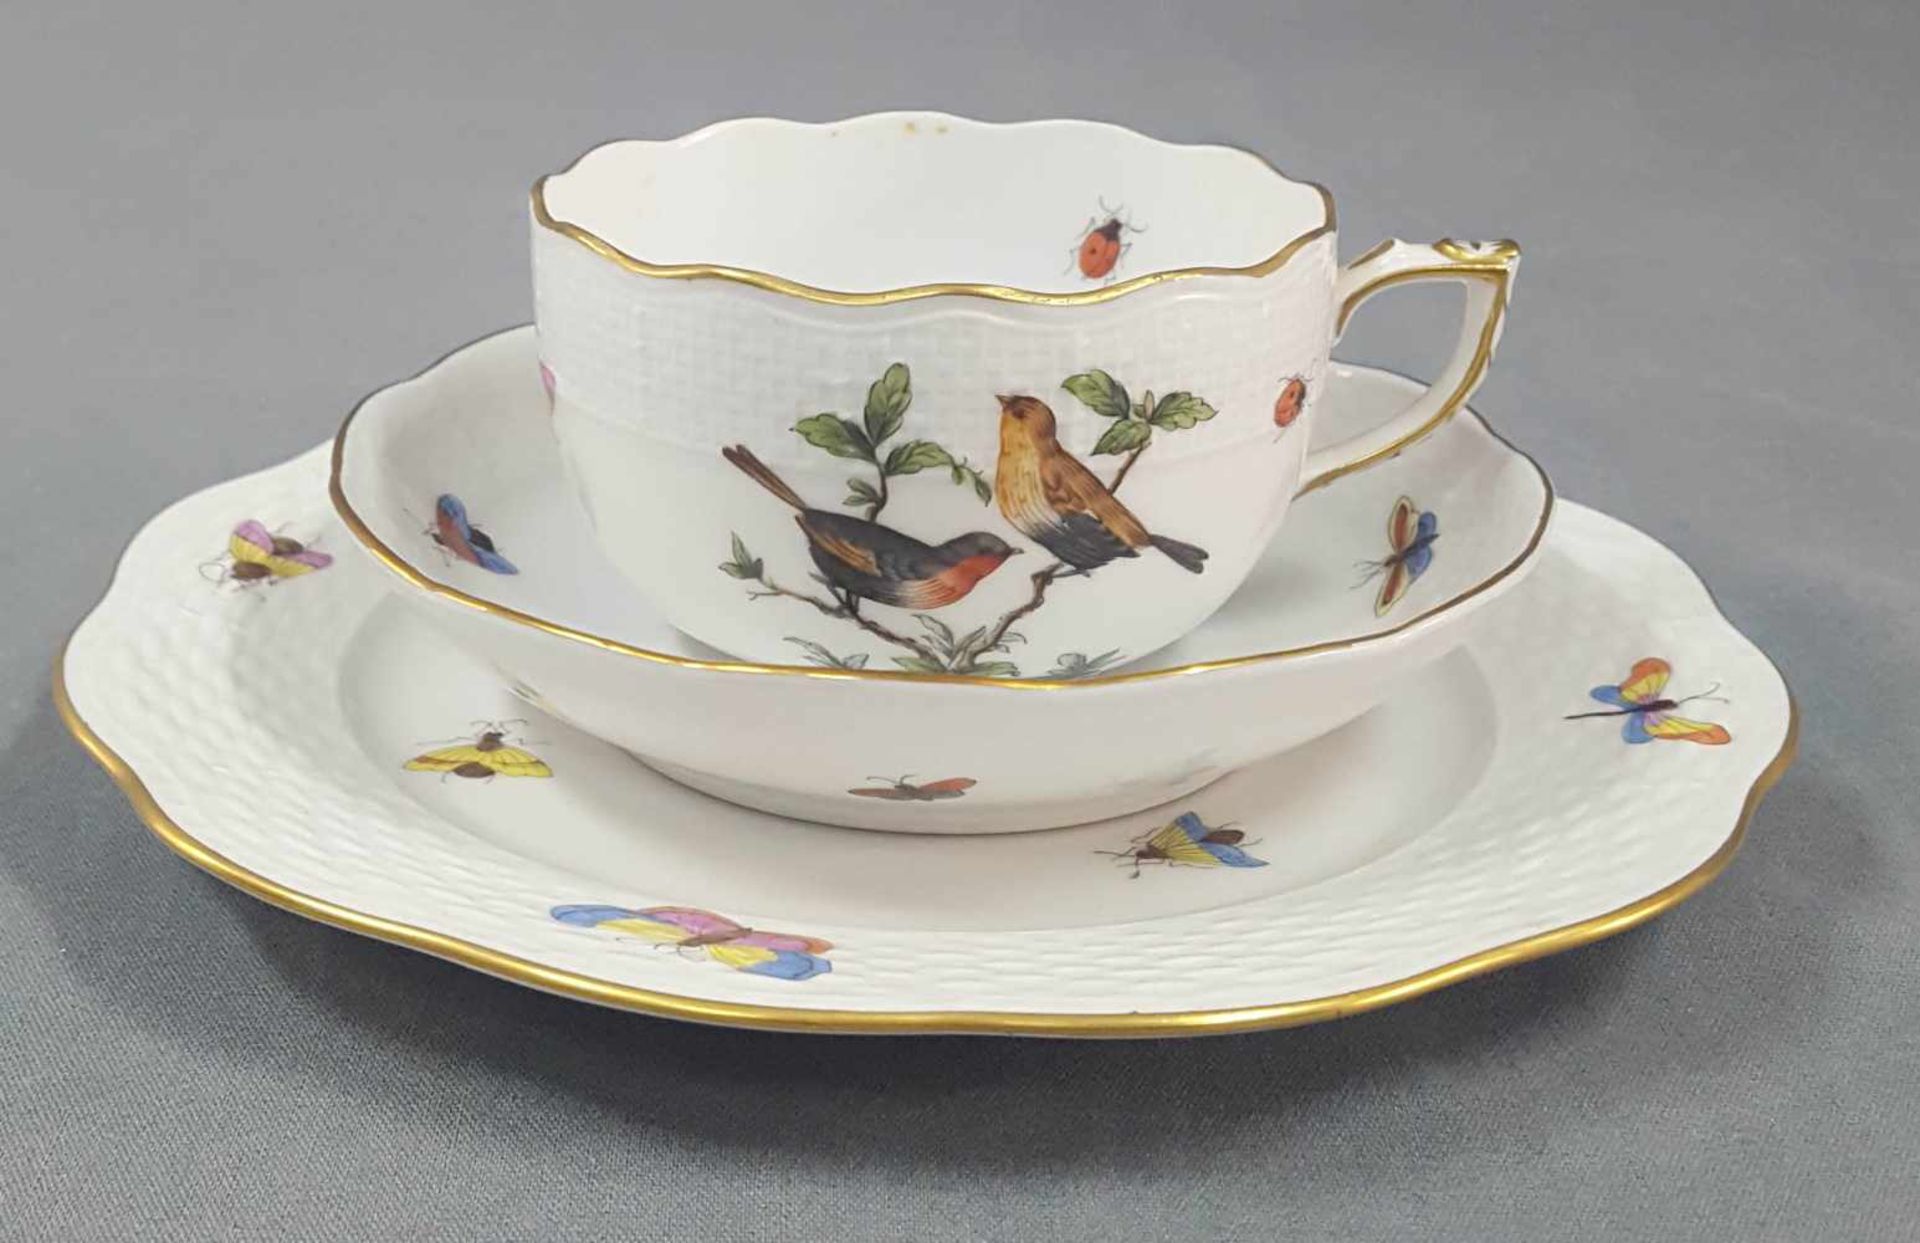 Herend Porcelain. Coffee service for at least 9 people. - Image 9 of 9